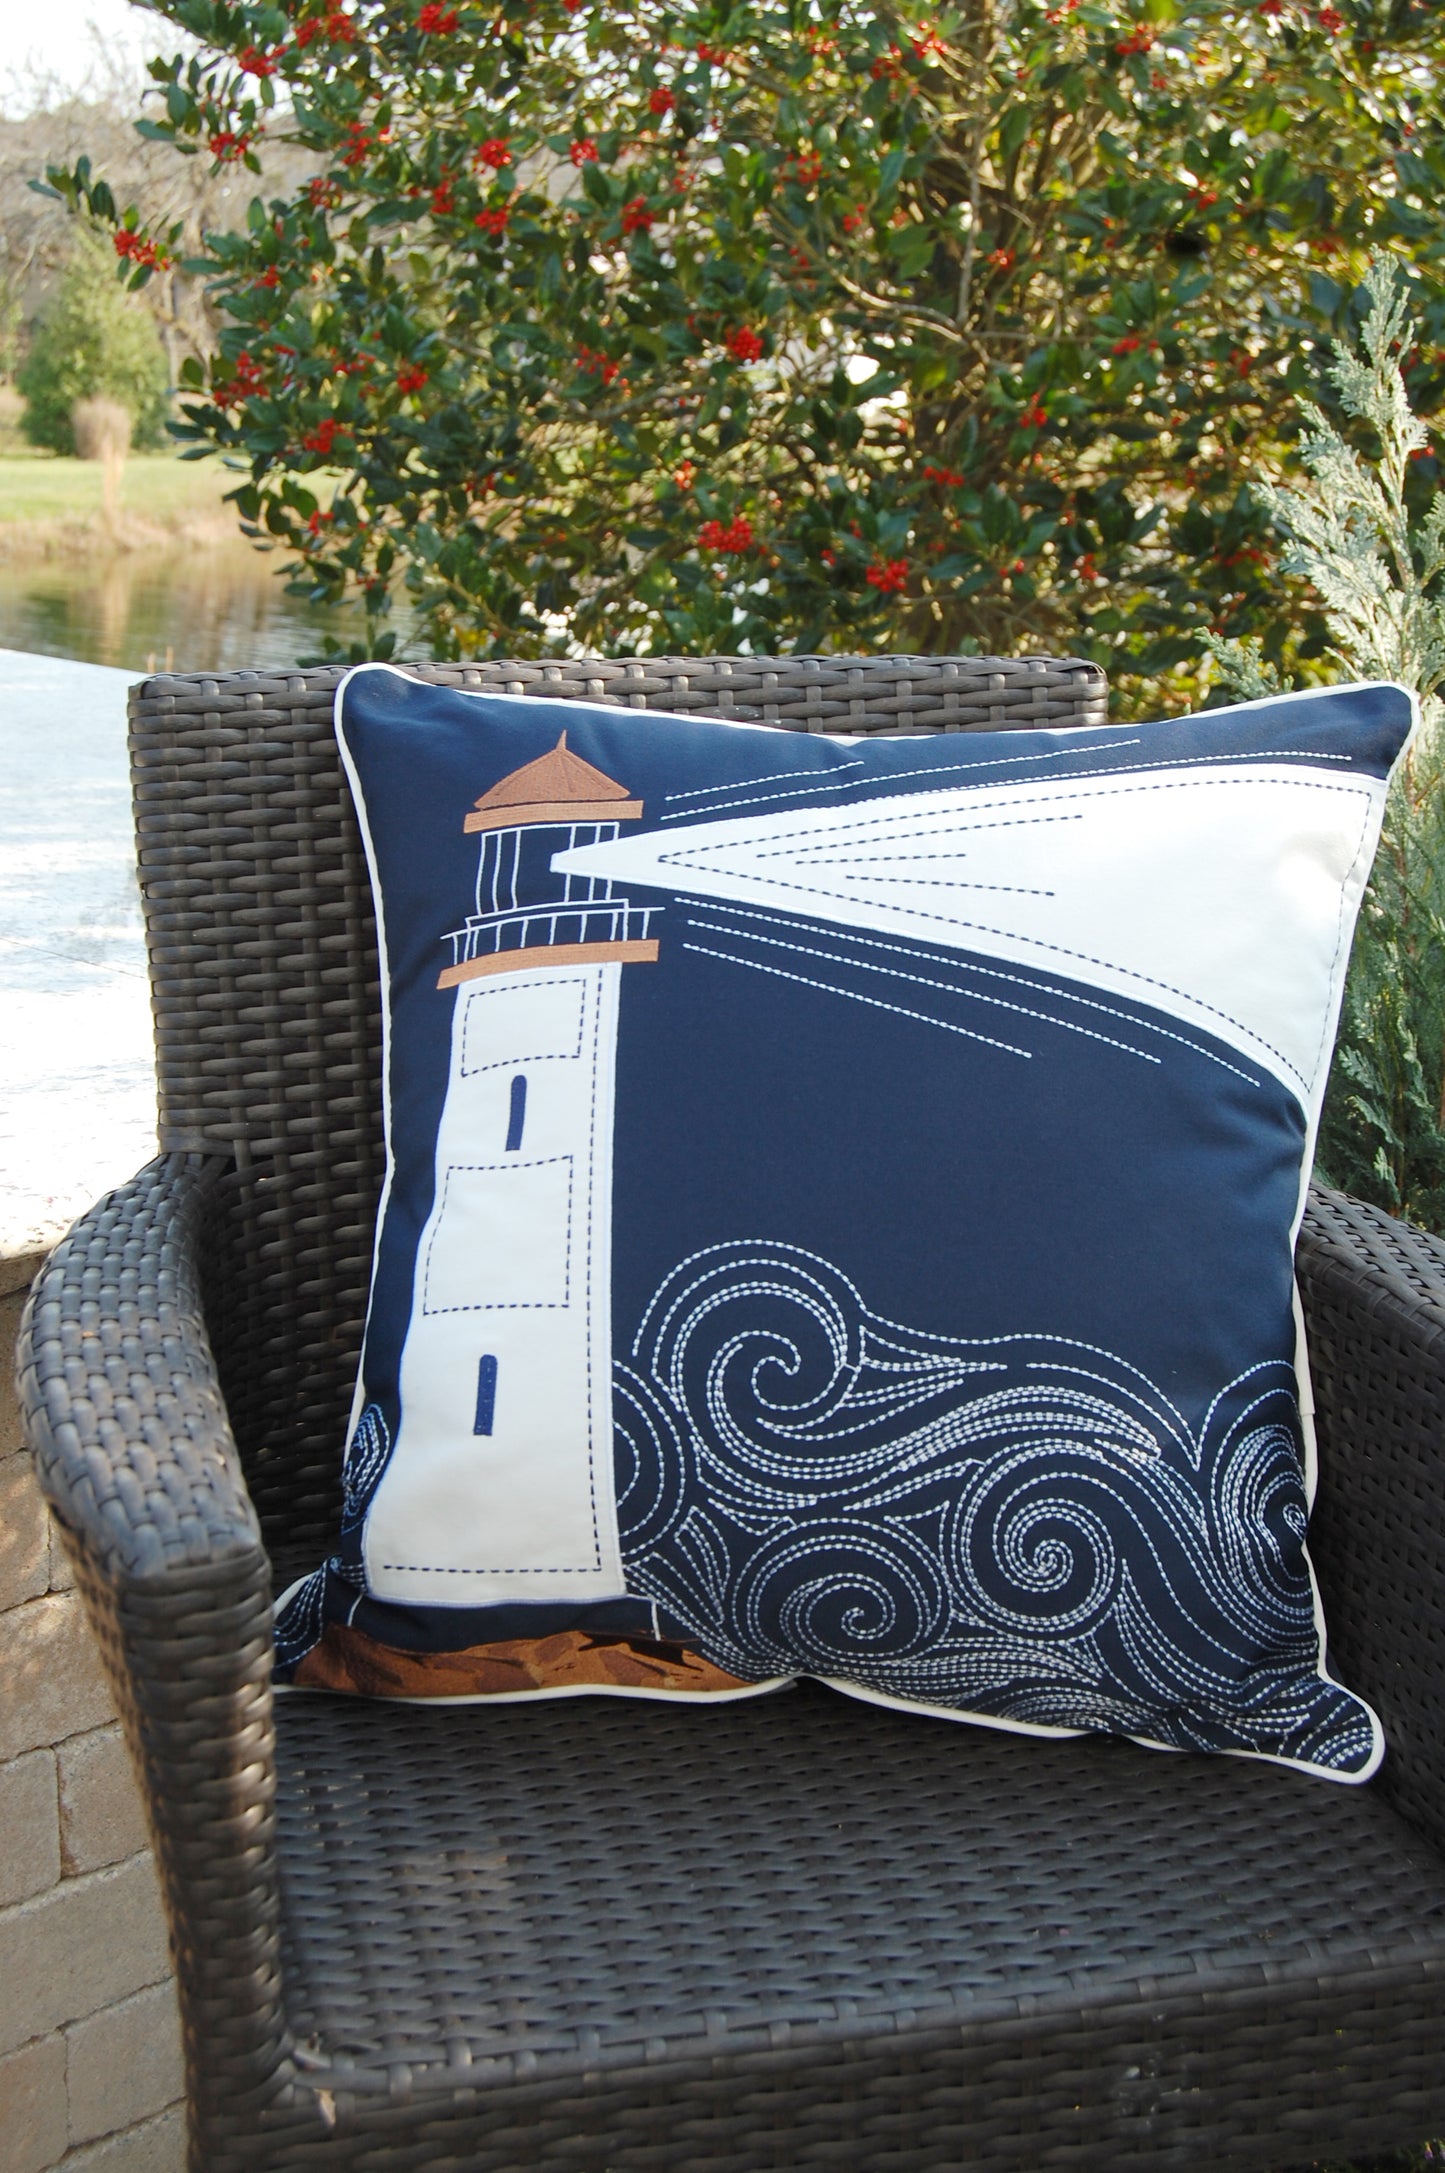 Cape Series Lighthouse pillow styled outside on a patio chair.